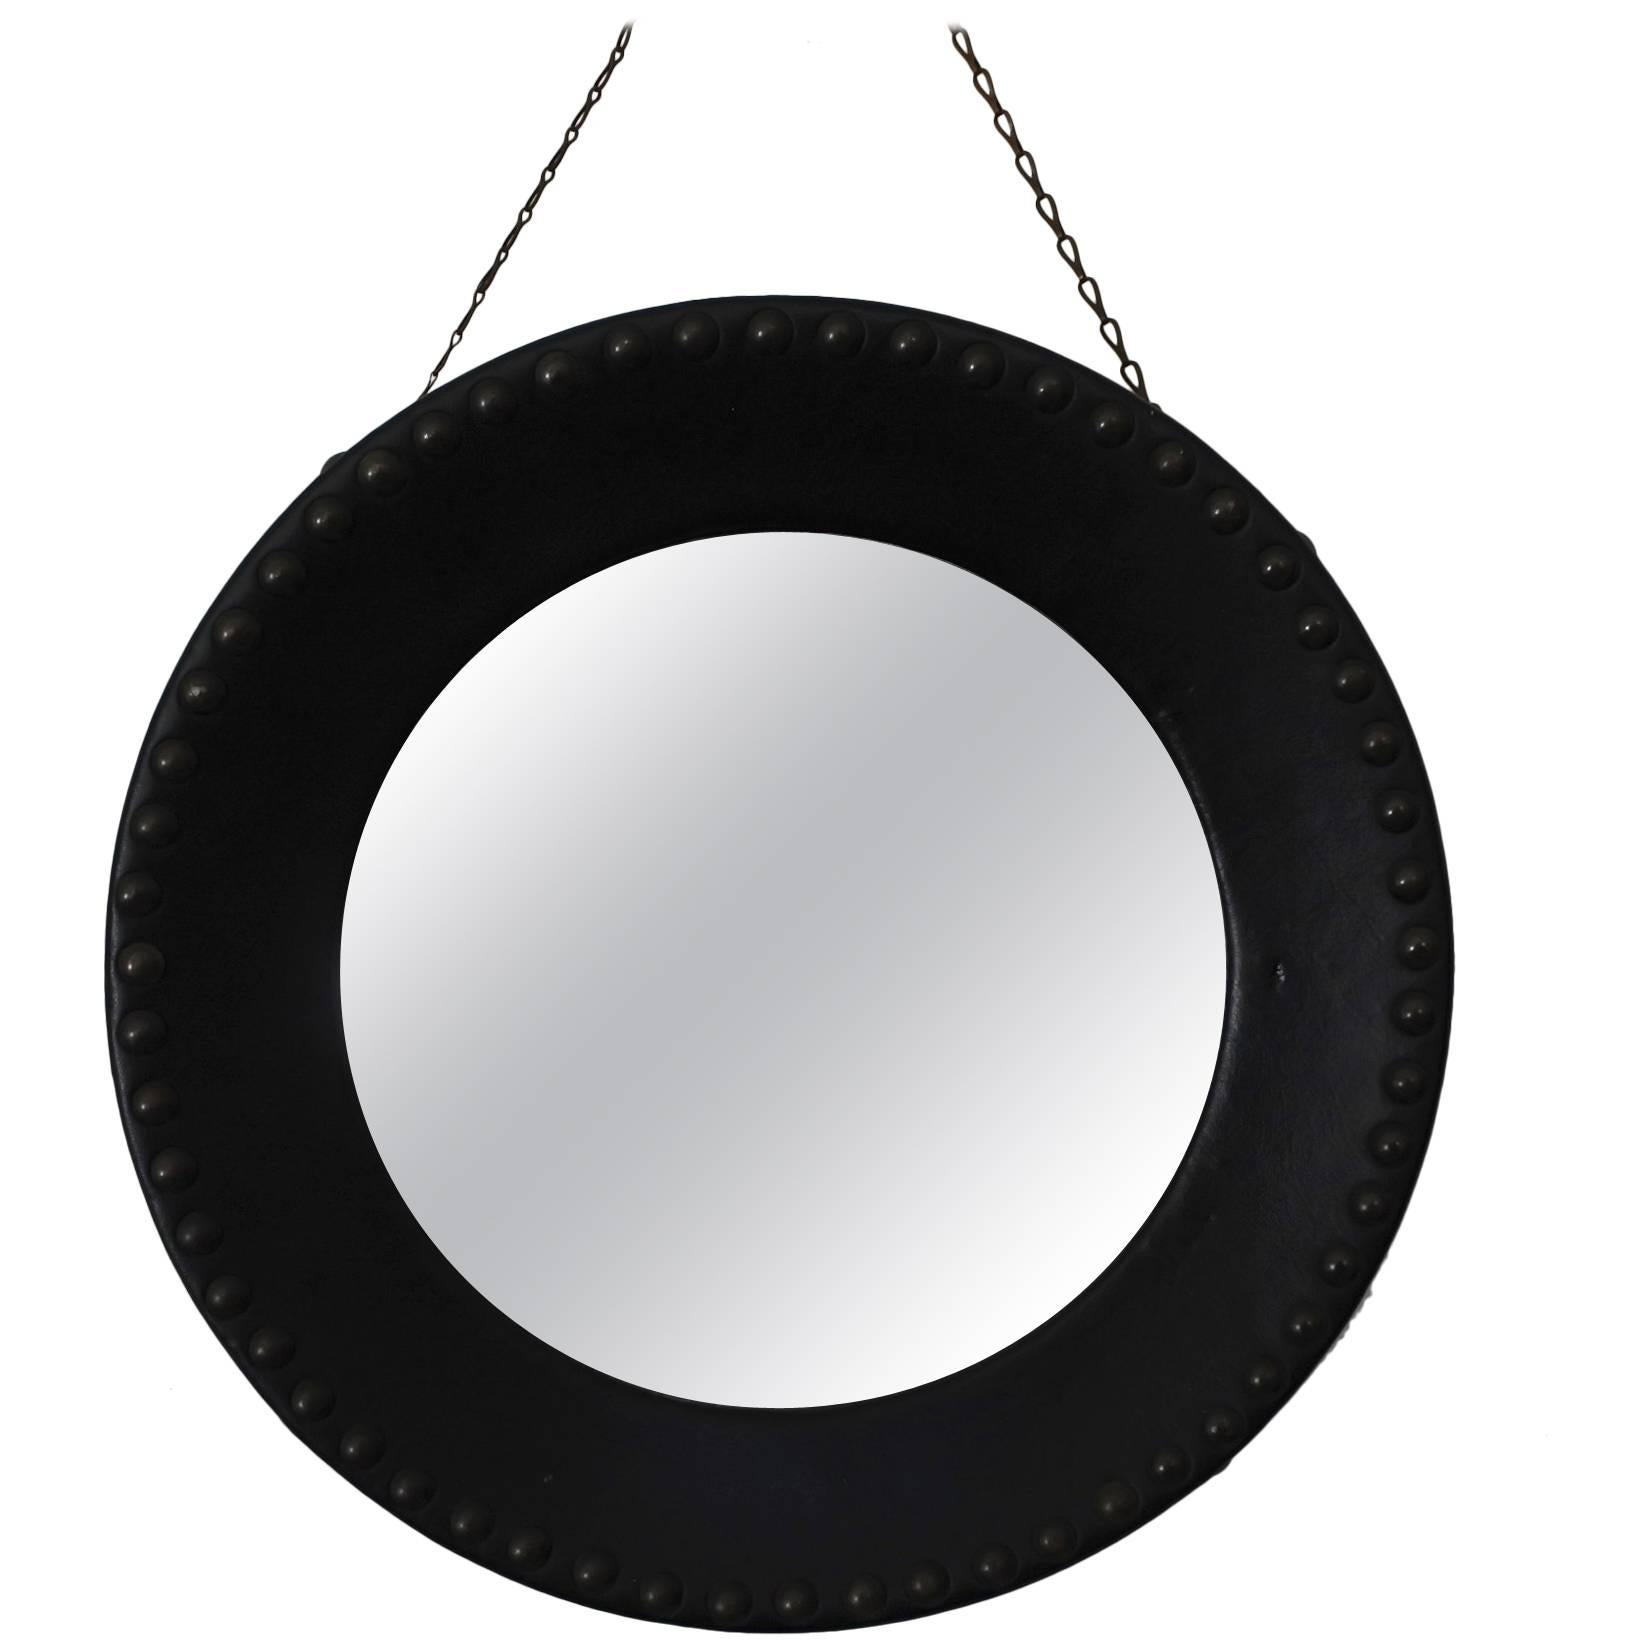 Midcentury Round Wall Convex Mirror in the Manner of Jacques Adnet, France 1950 For Sale